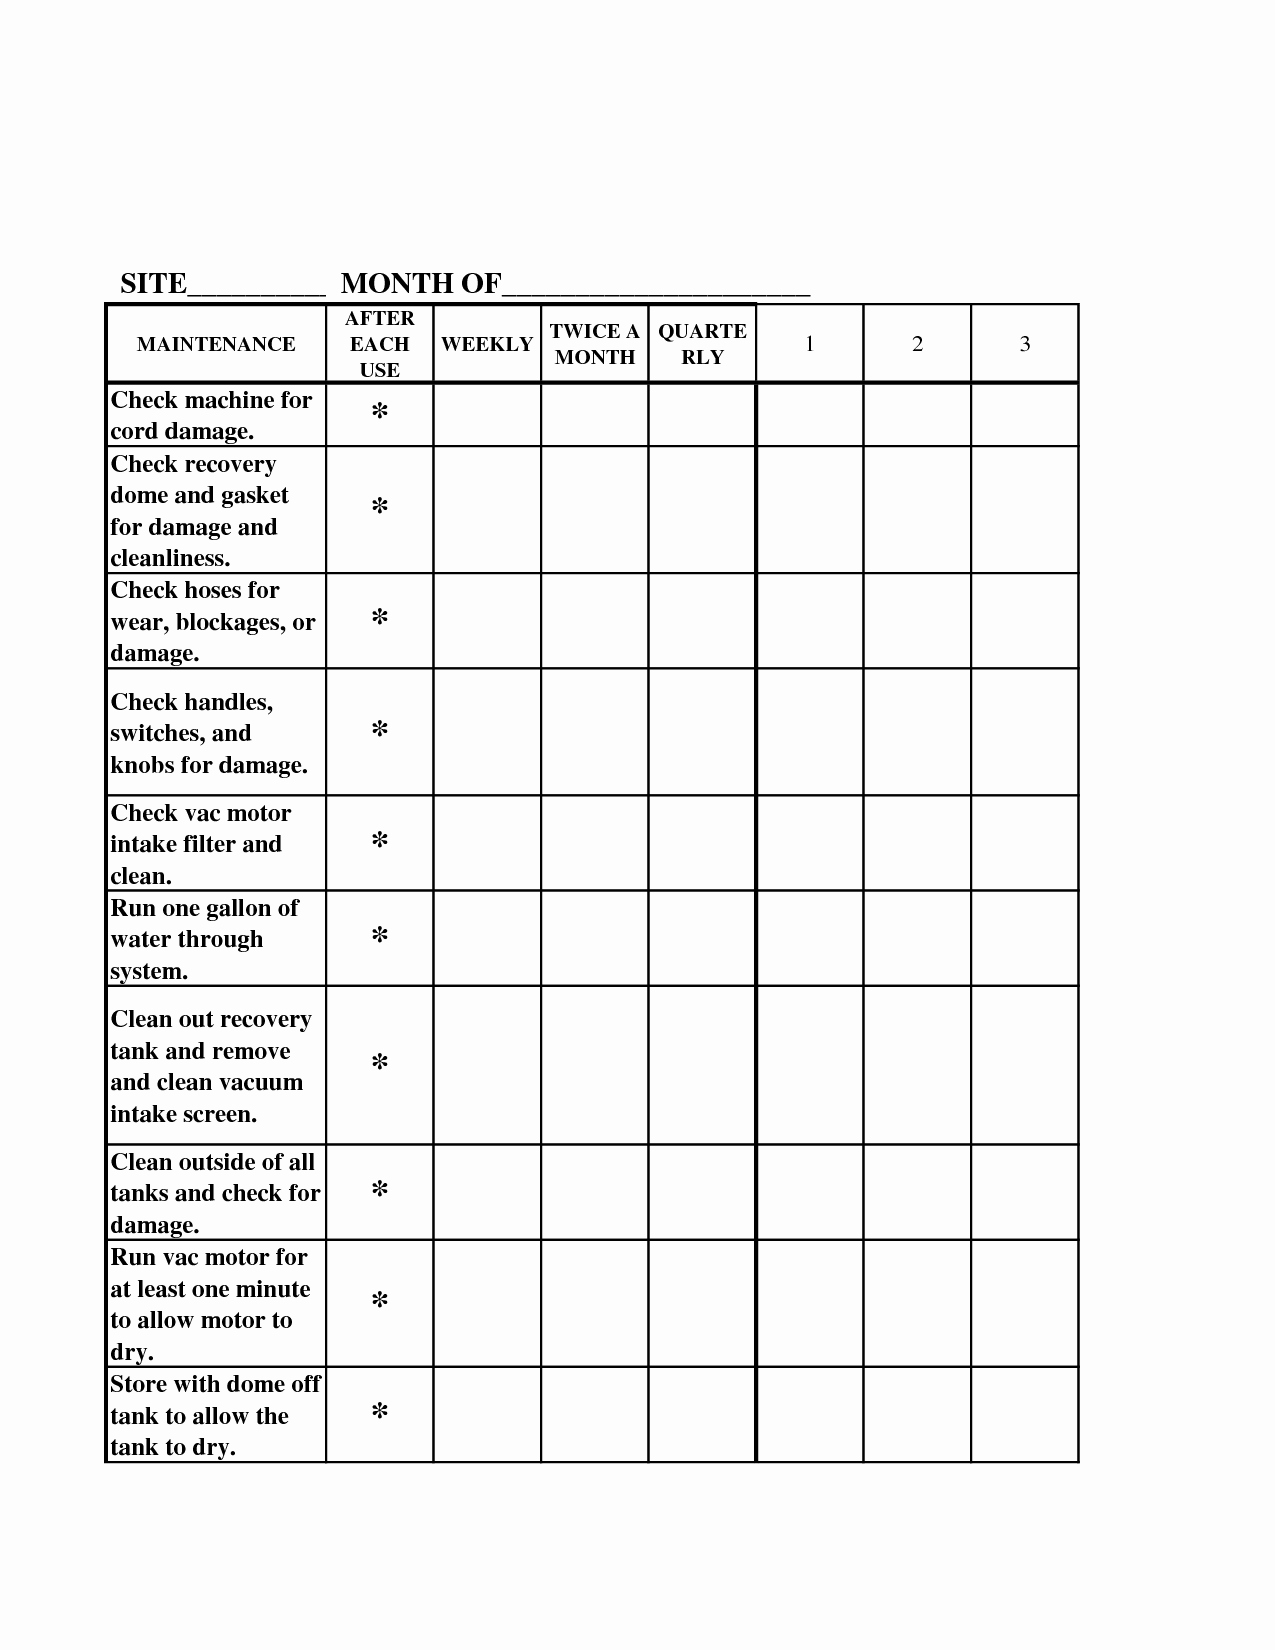 Bathroom Cleaning Schedule Template Unique Amazing Of Sample Restroom Cleaning Checklist Have Bathr 2522